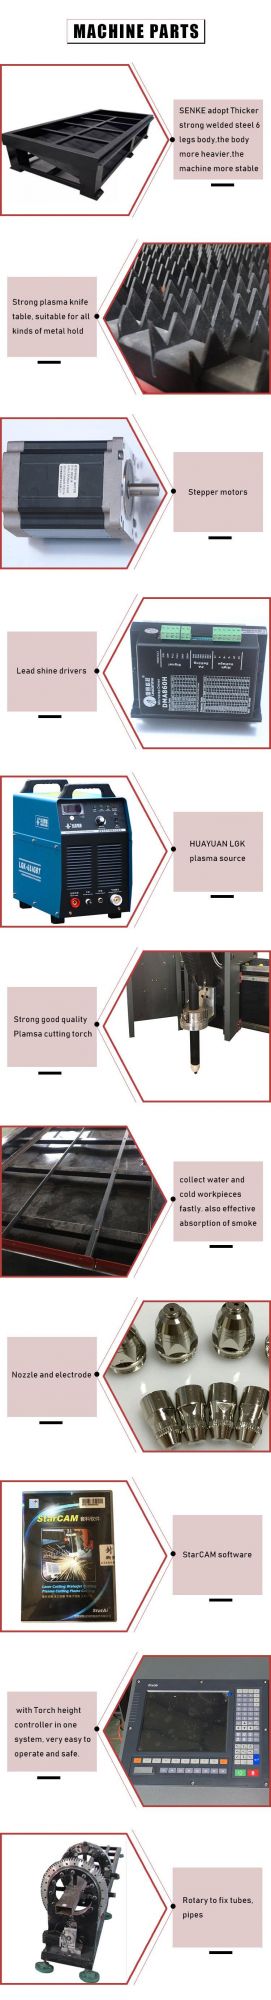 CNC Plasma Cutting Machine for Carbon Steel Stainless Steel Metal Sheet Processing Cutting 120A 200A 300A 400A CNC Plasma Cutter Price